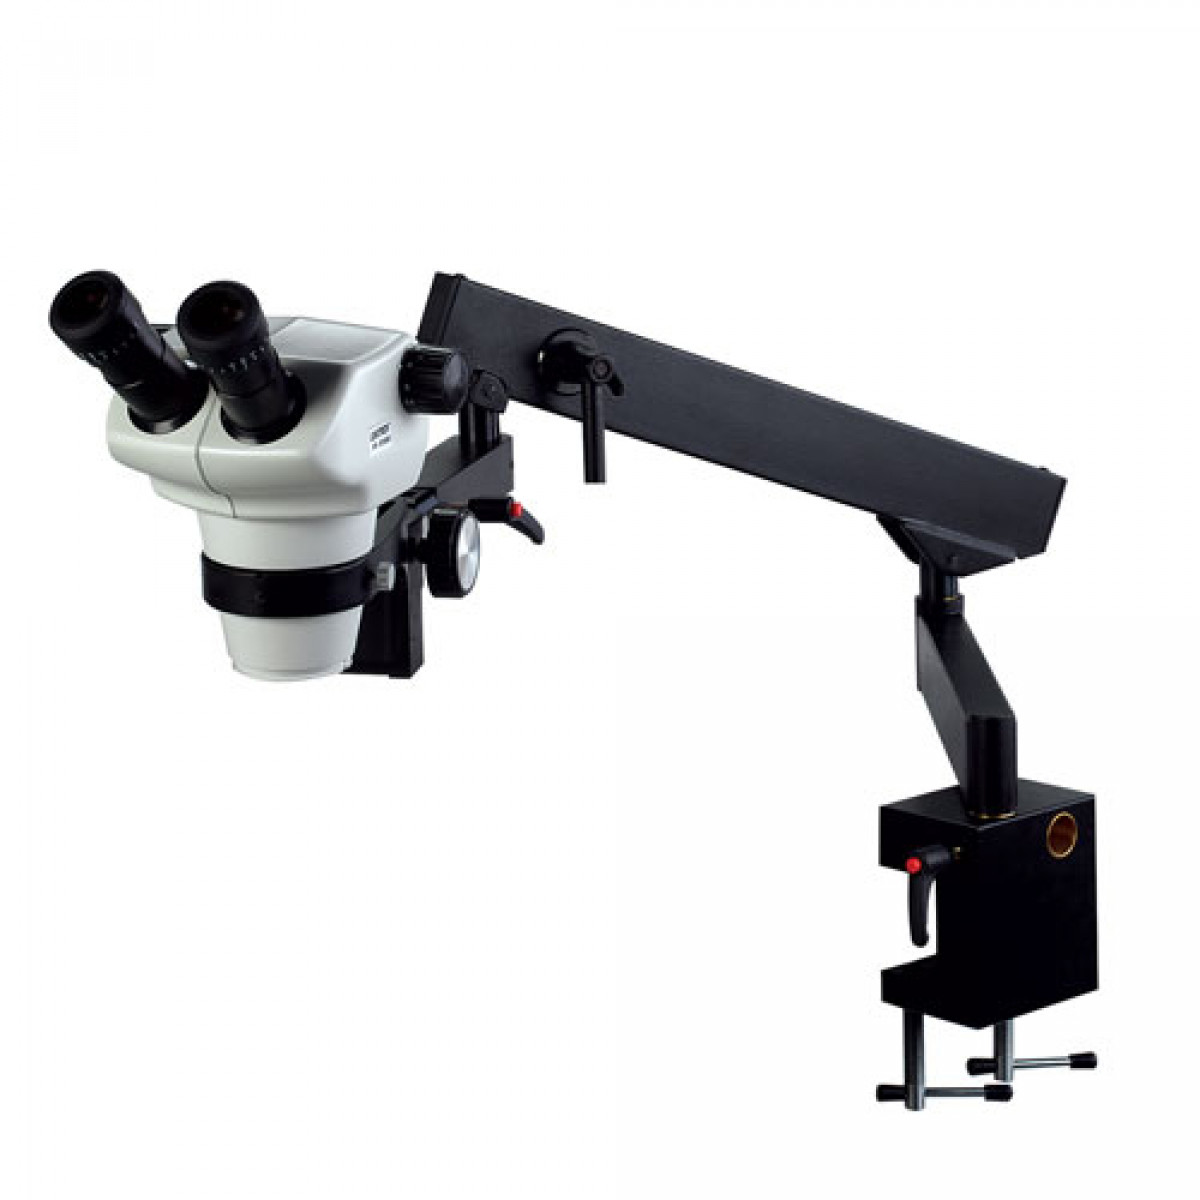 Flex-Arm stand C-Mount 6.3:1 Zoom Stereo Microscope 